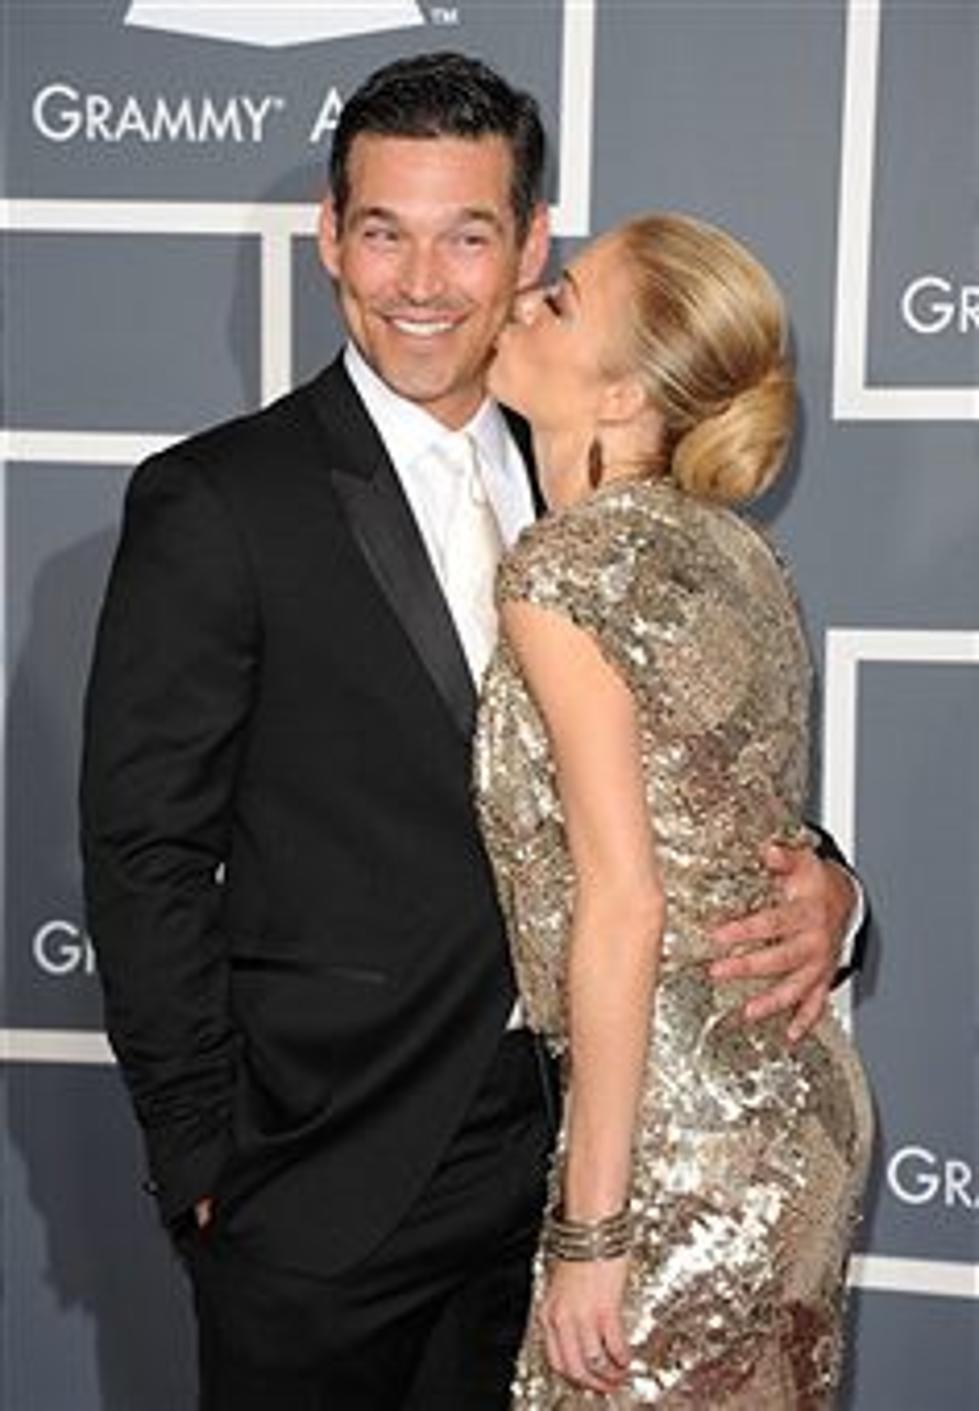 LEANN RIMES SAYS NEW HUBBY IS AN “AWESOME GUY”